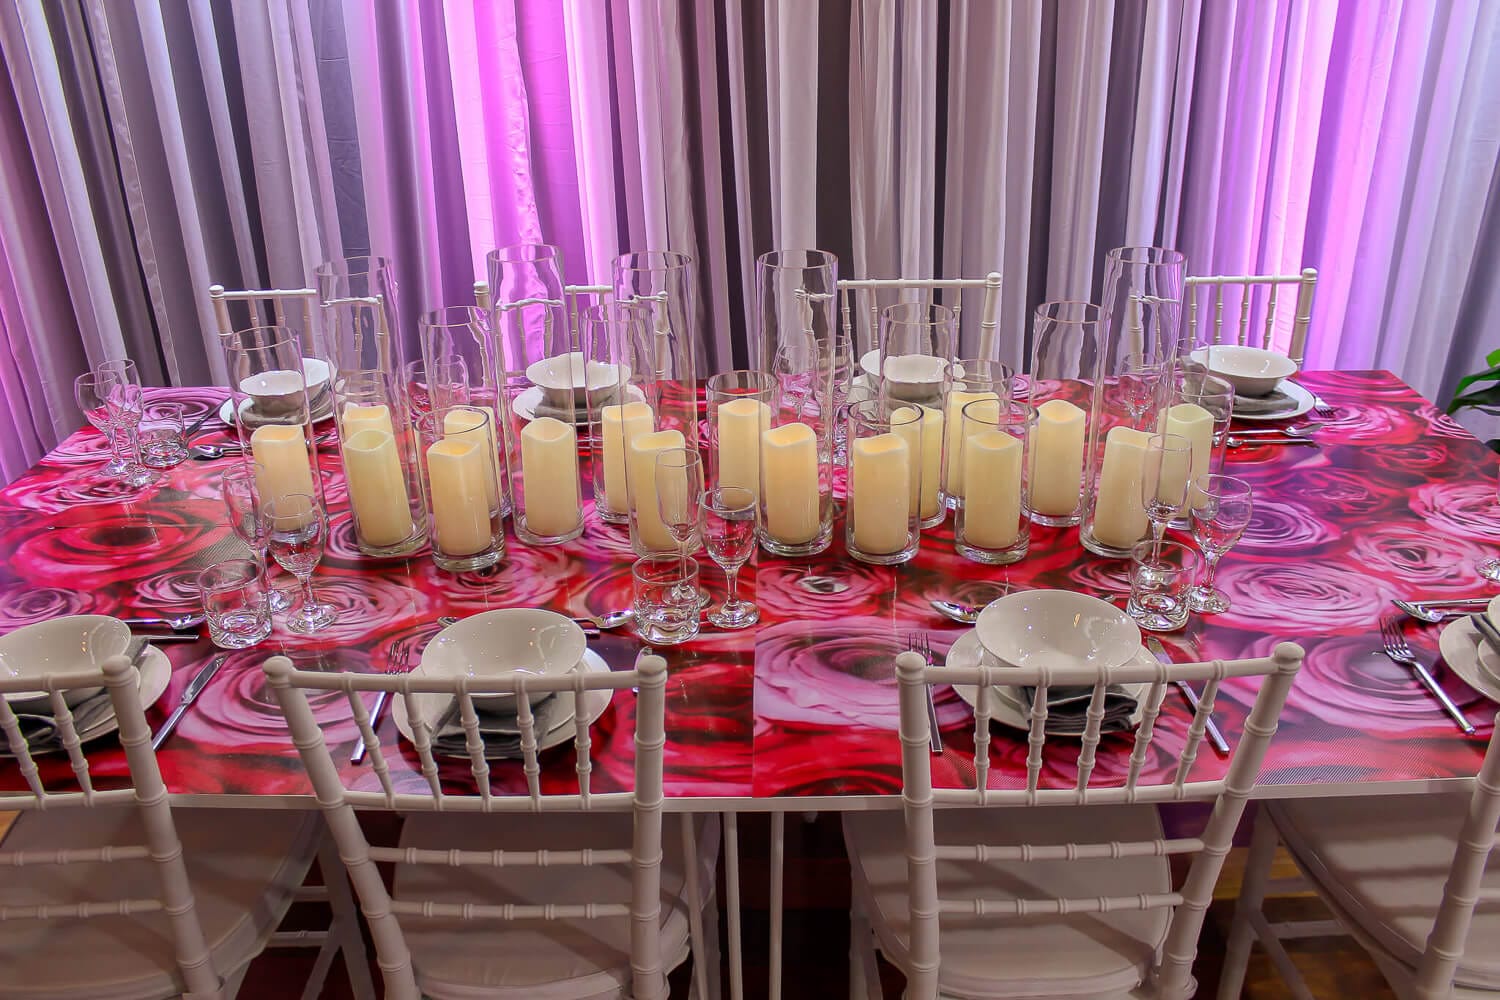 Candle Tablescape Hire Melbourne with uplighting 2